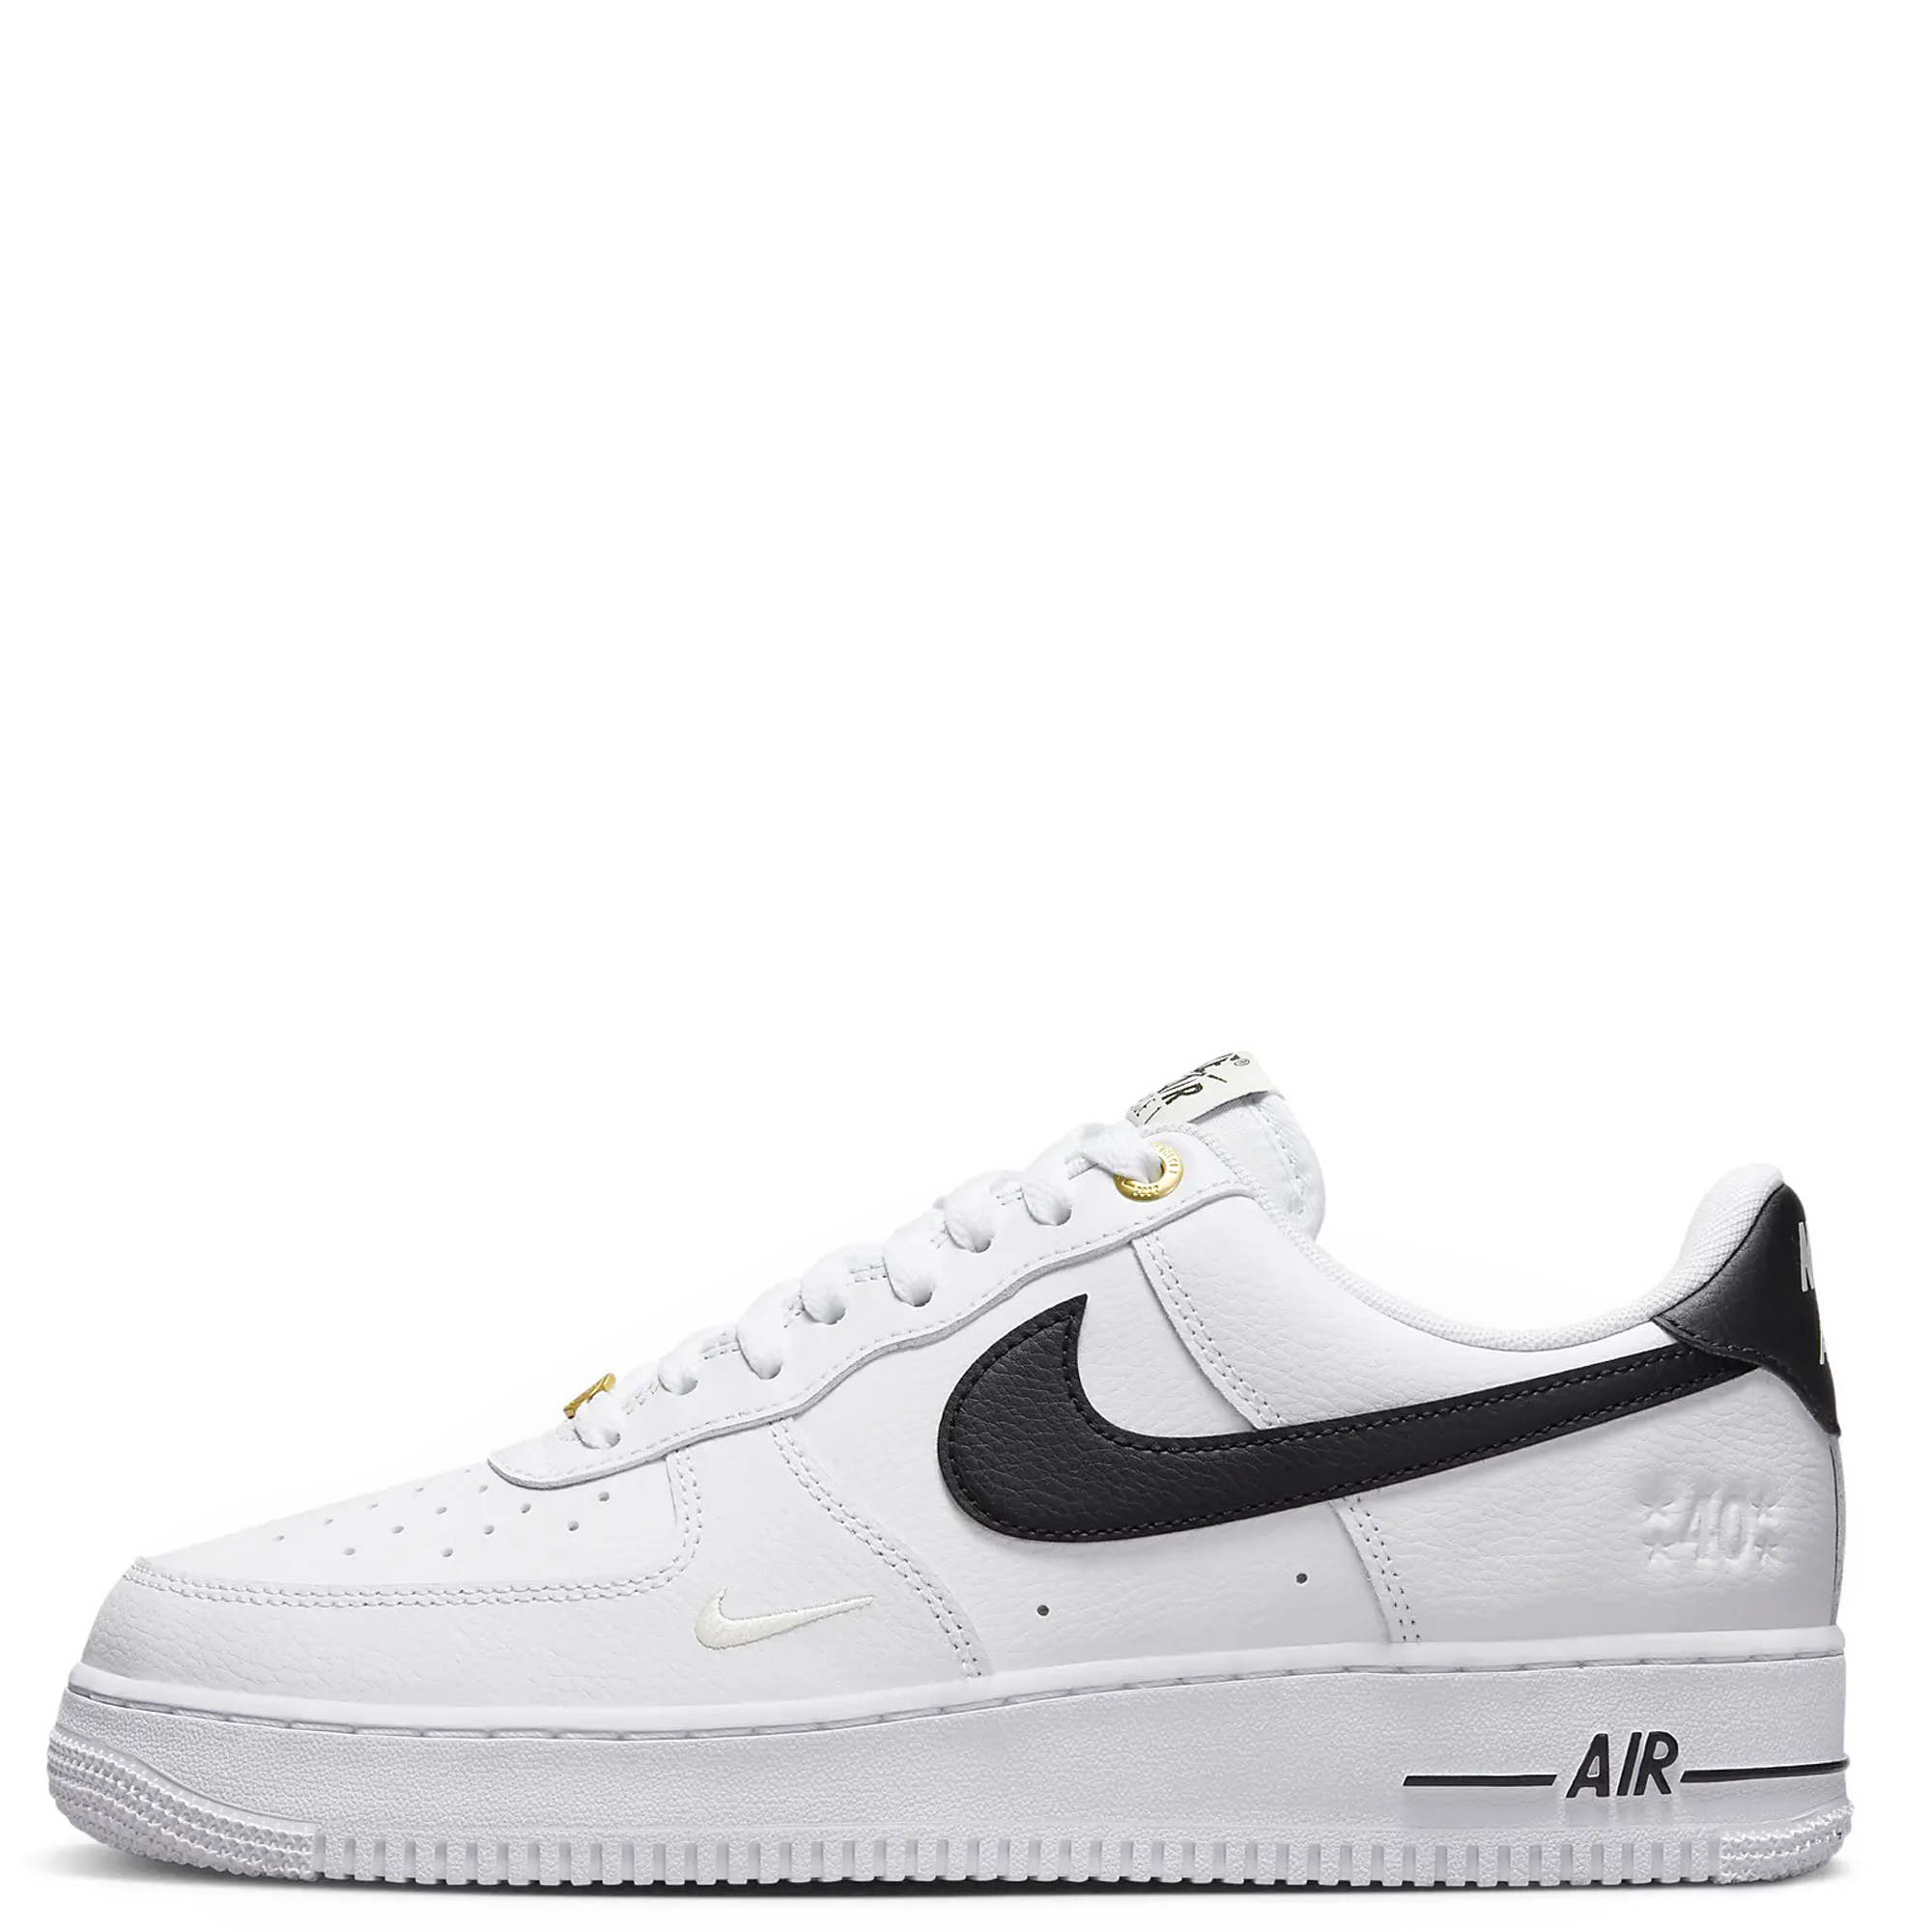 cassette fatigue meat NIKE Air Force 1 '07 LV8 DQ7658 100 - Shiekh